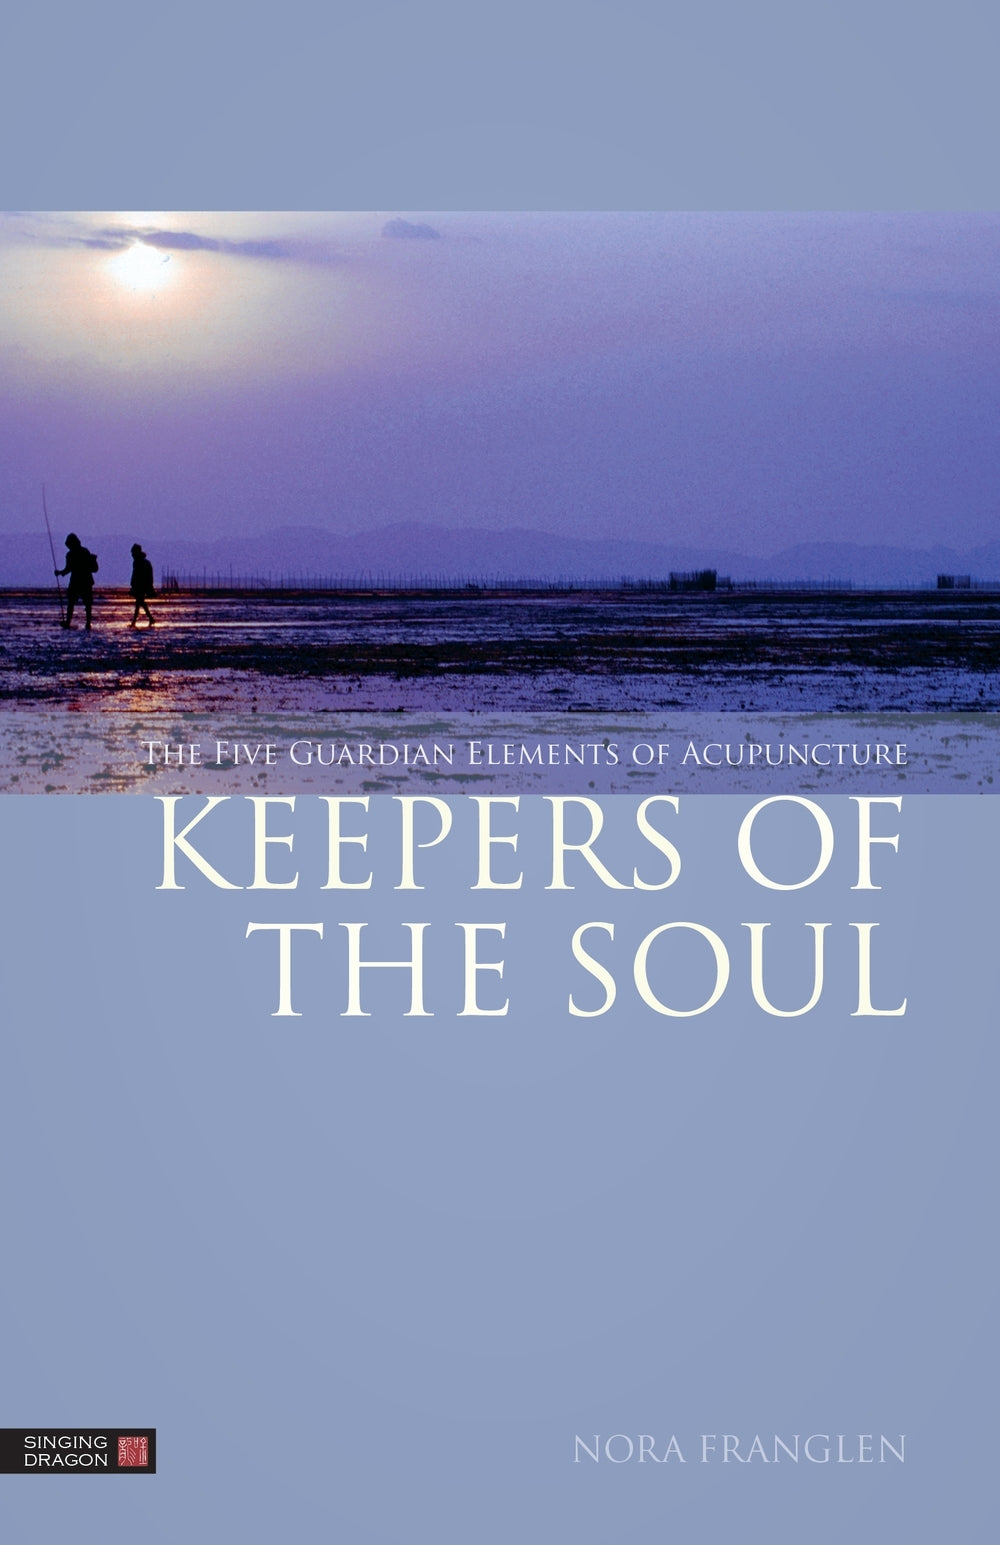 Keepers of the Soul by Nora Franglen